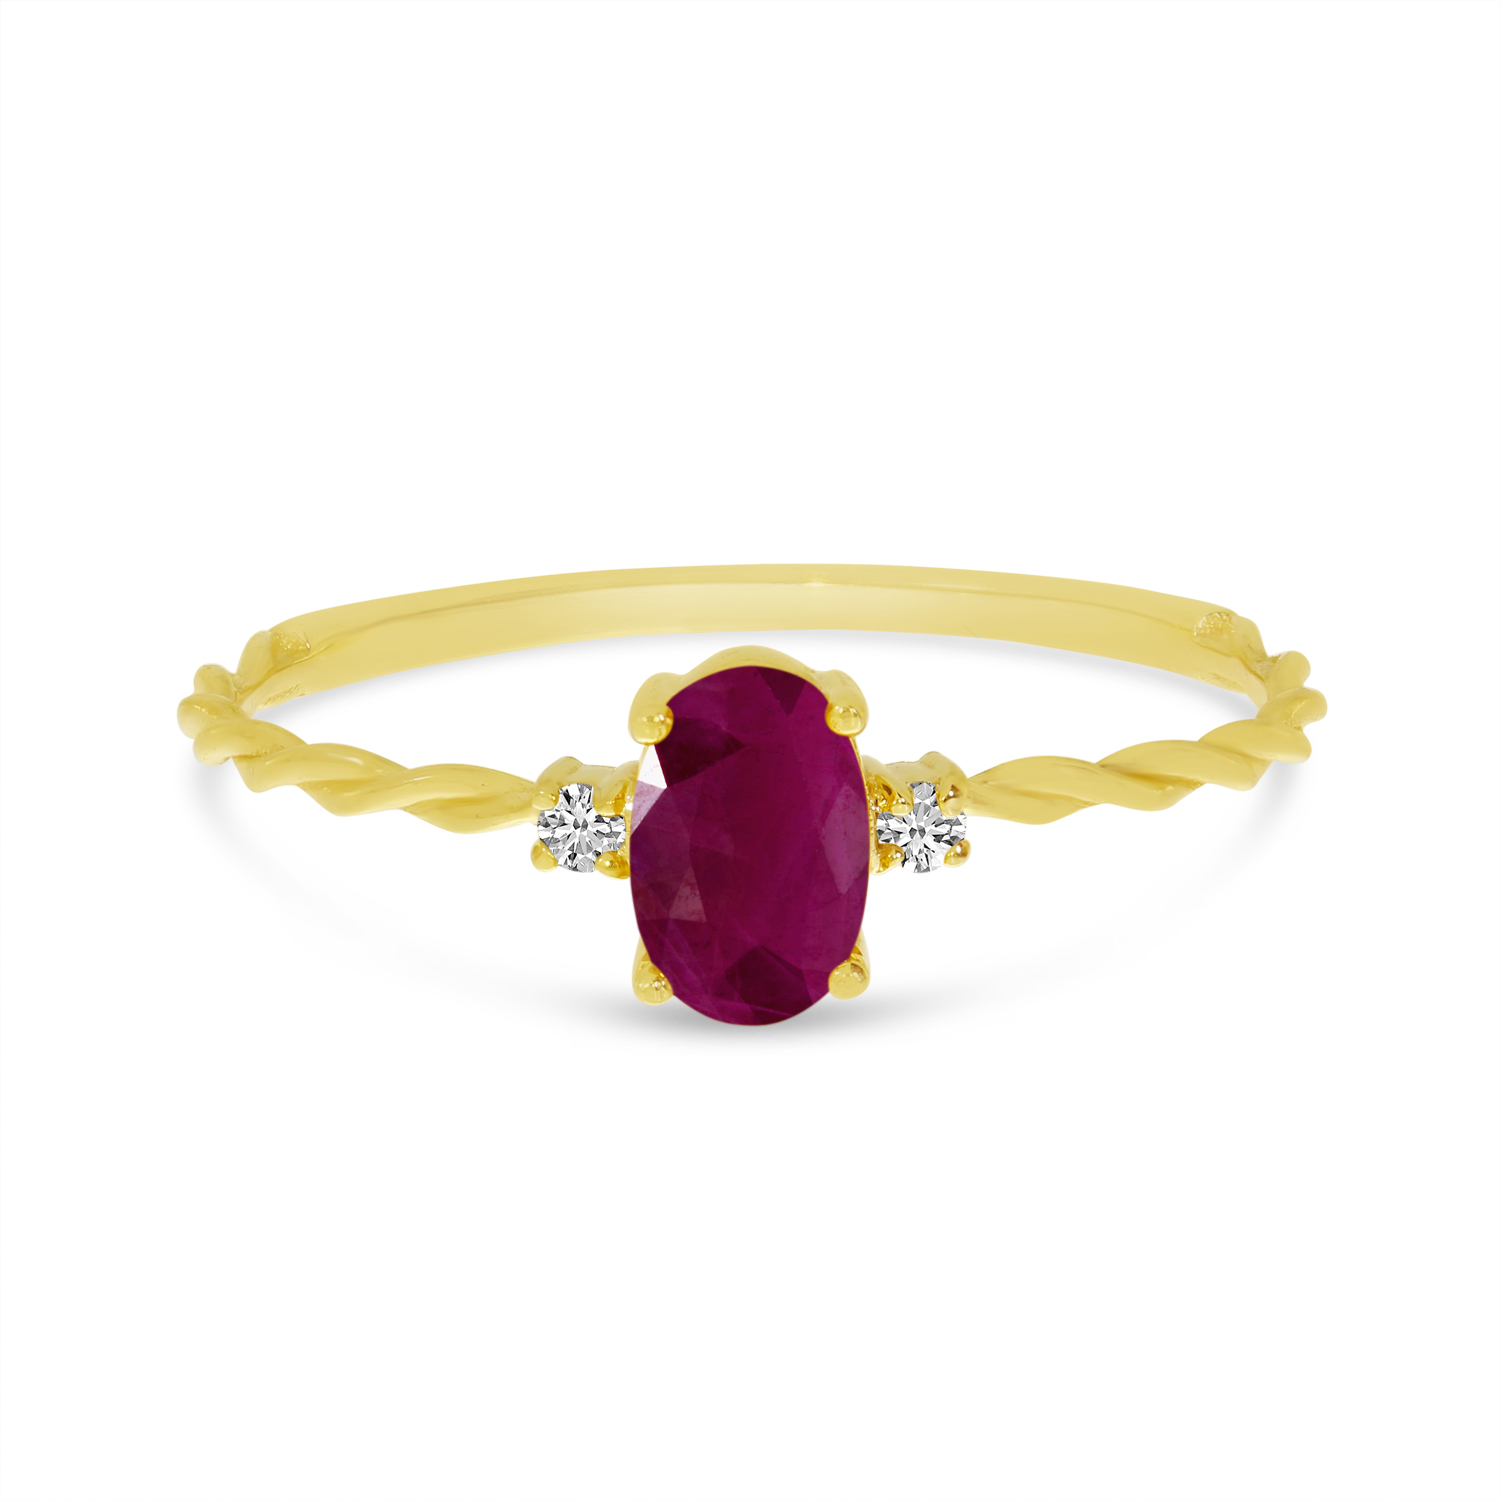 14K Yellow Gold Oval Ruby Birthstone Twisted Band Ring